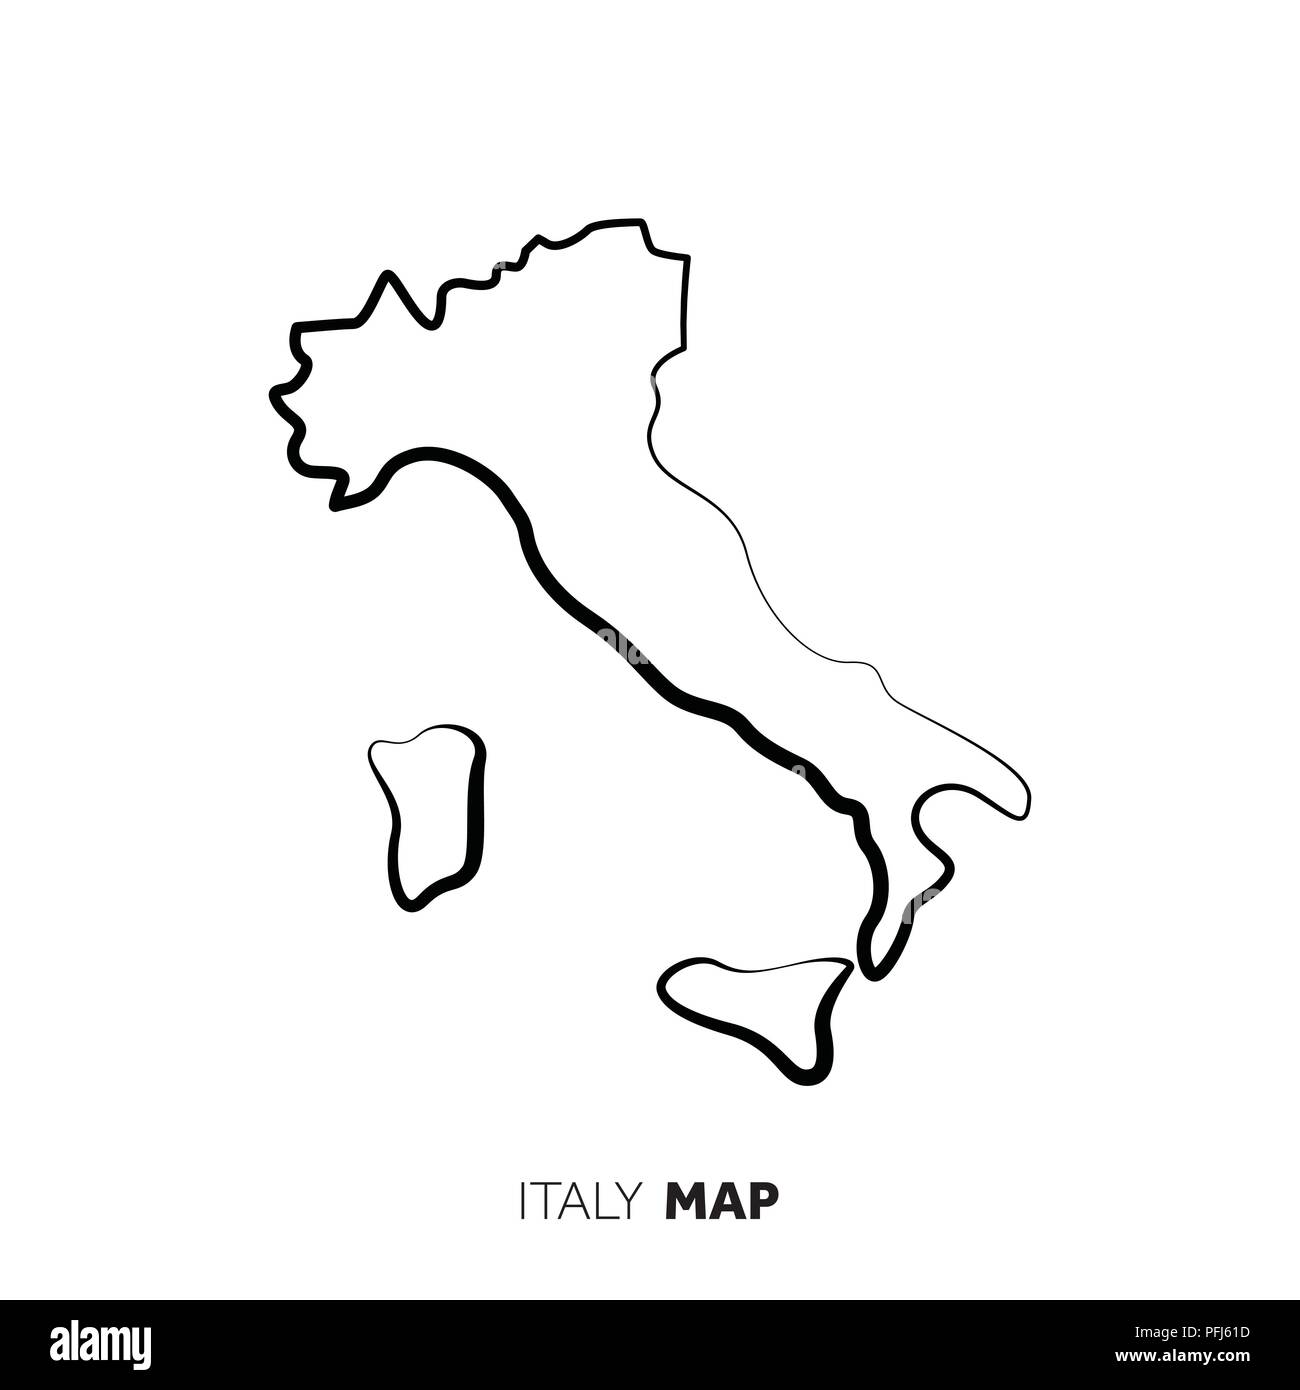 Italy vector country map outline. Black line on white background Stock Vector